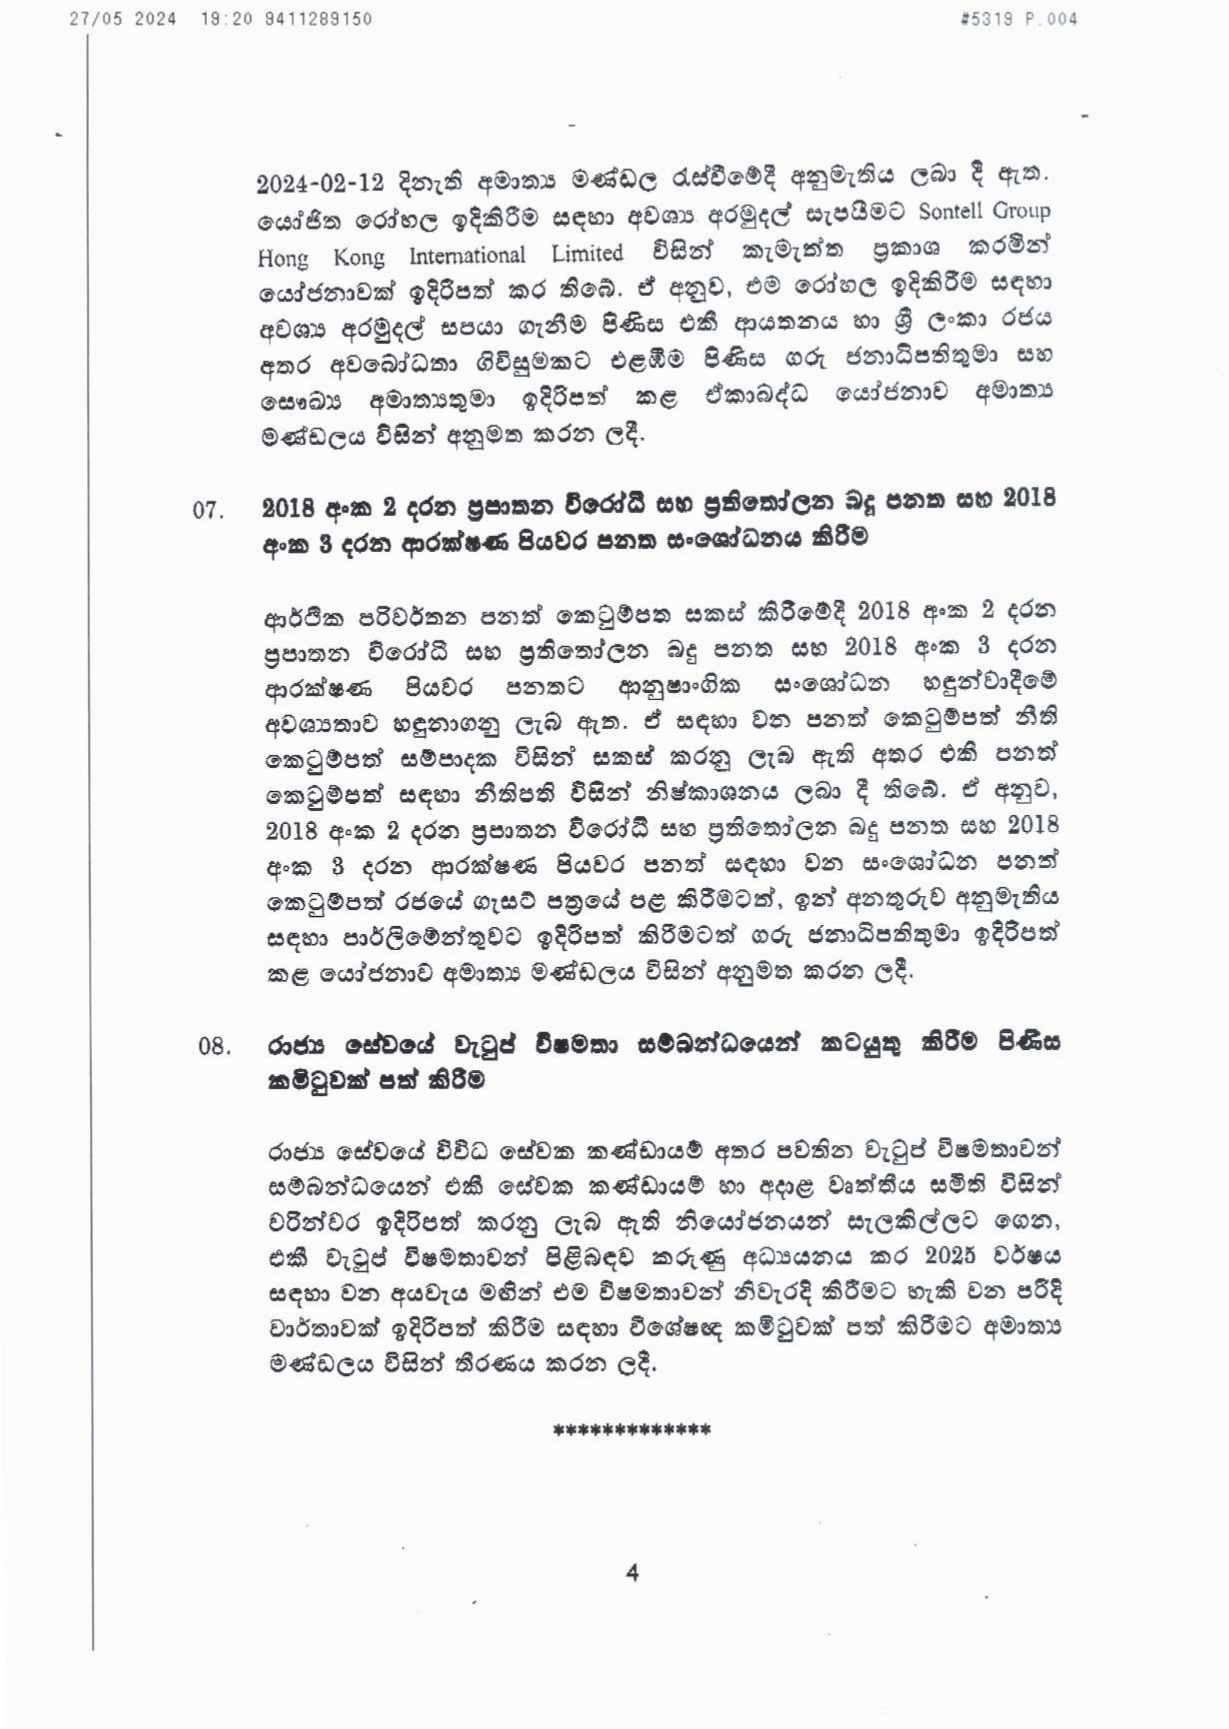 Cabinet Decision on 27.05.2024 page 00041